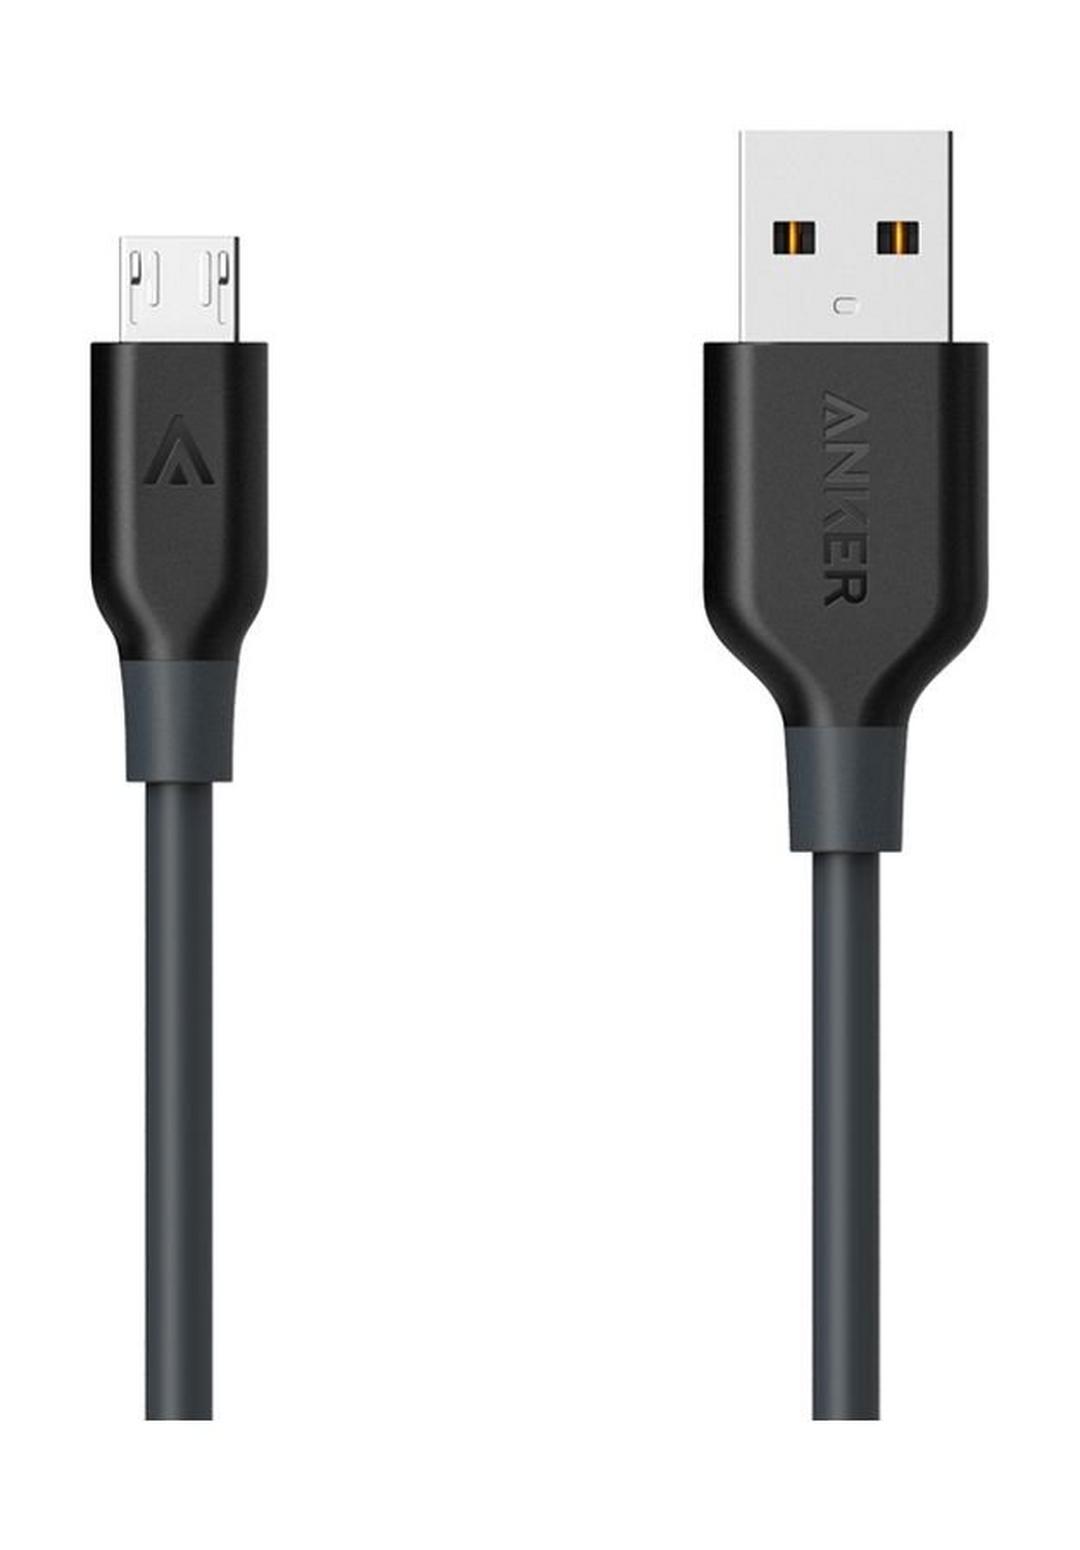 Anker Powerline 1.8 Meters Micro-USB Cable (A8133H12) - Black